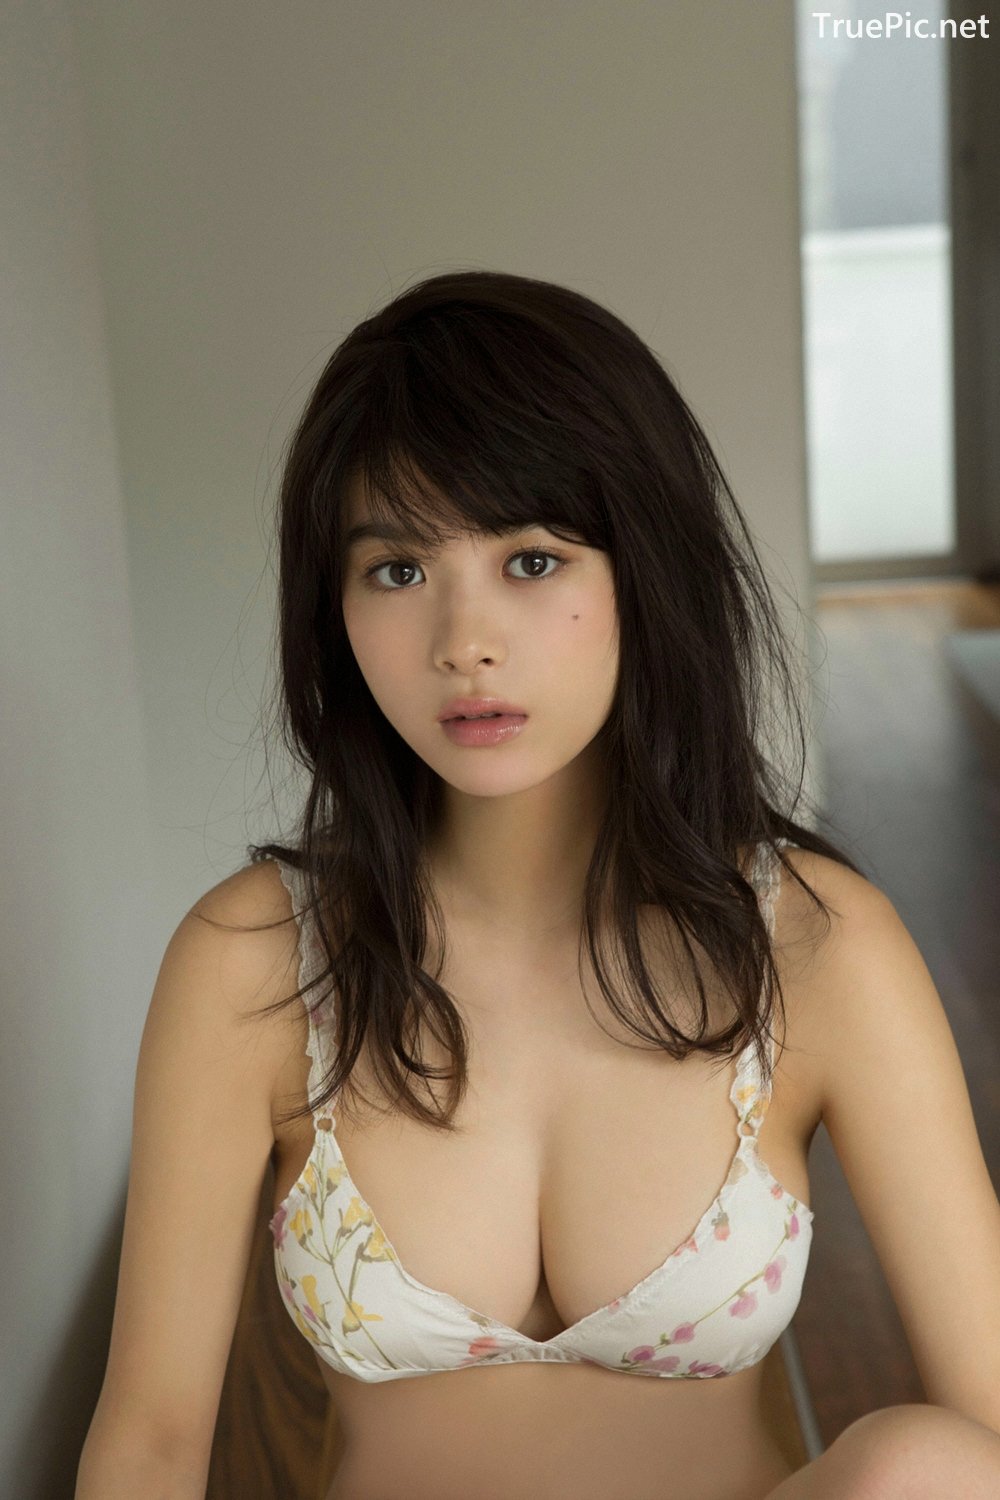 Japanese Actress And Model - Fumika Baba - YS Web Vol.729 - TruePic.net - Picture-93